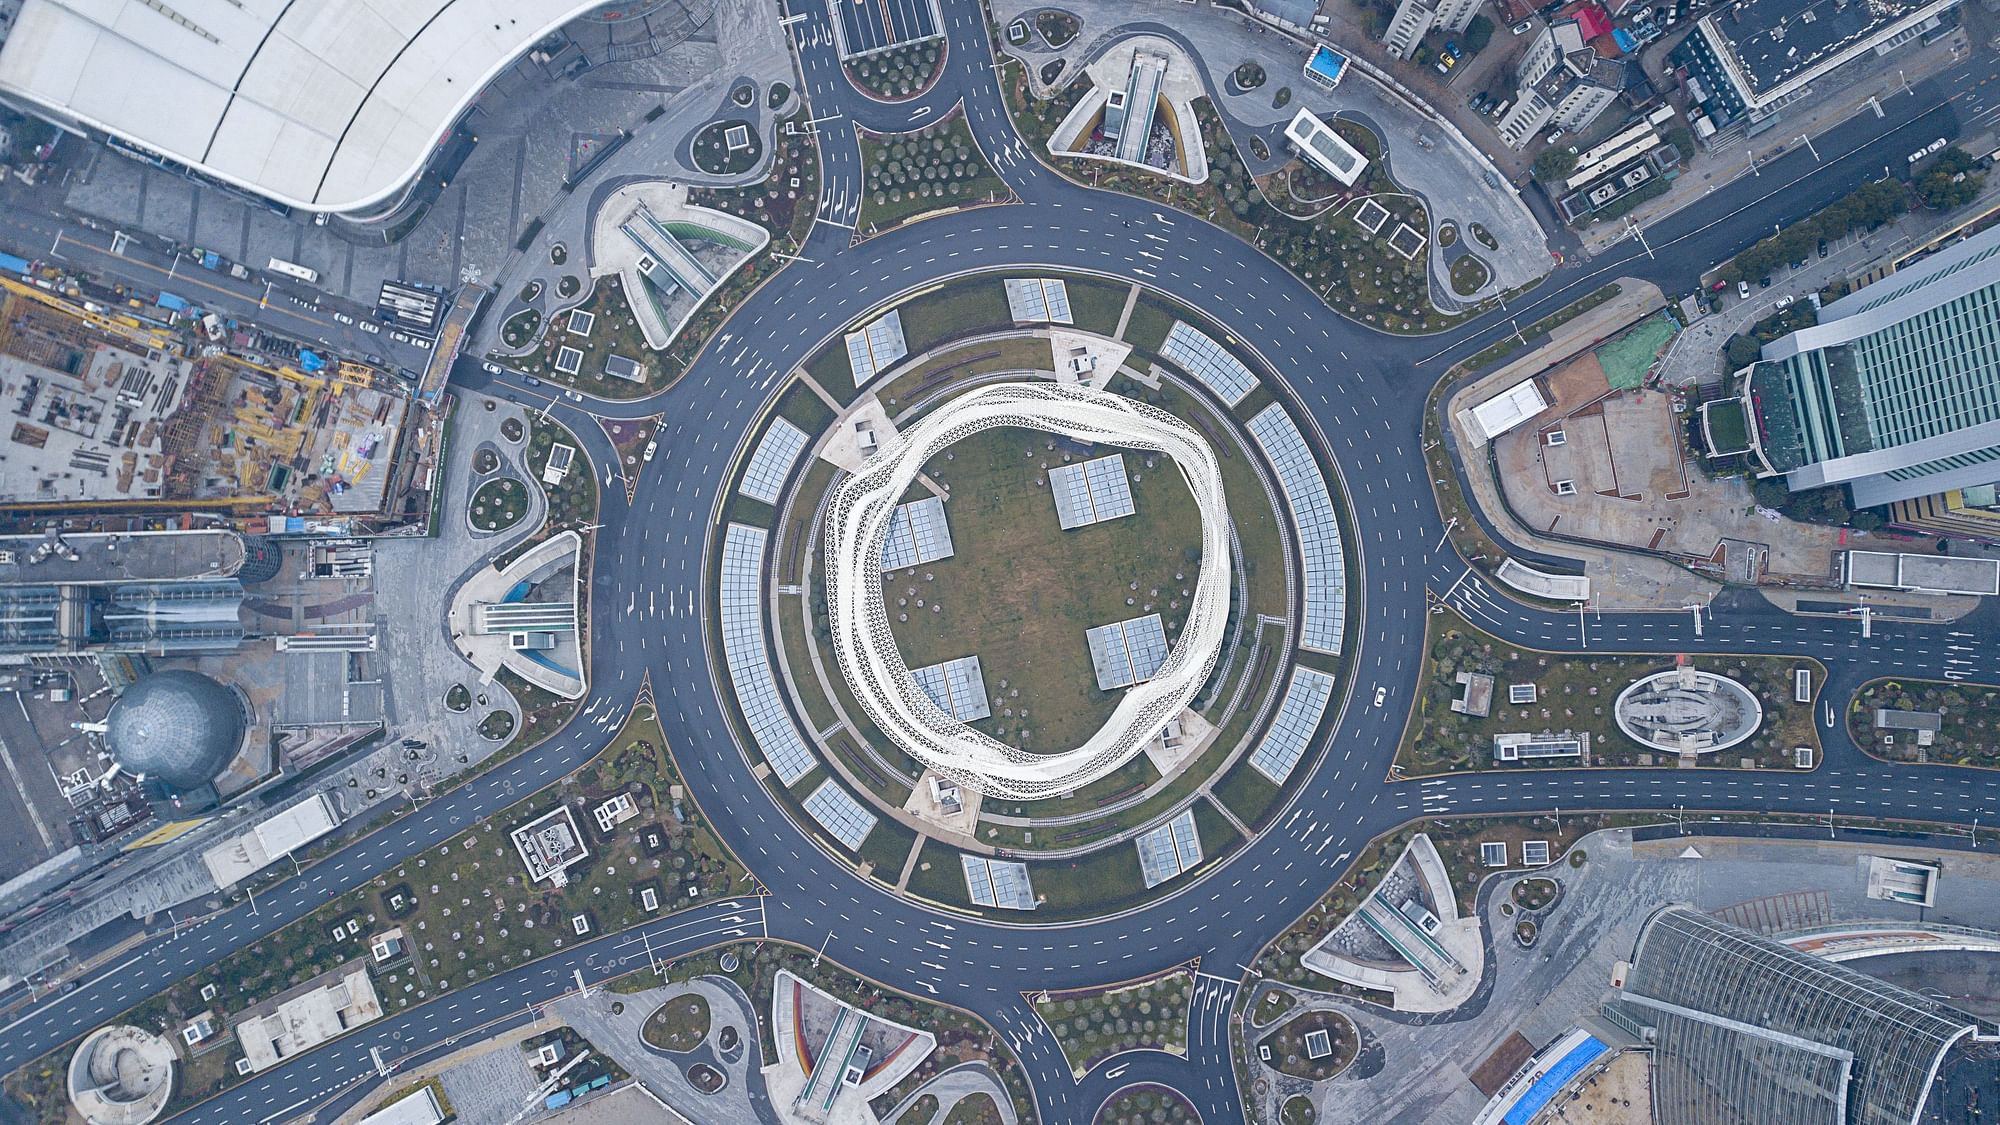 An aerial photo shows the Optics Valley Square complex, Asia’s largest urban underground complex, in Wuhan, Hubei Province. Many local residents have reduced or avoided outdoor activities during the novel coronavirus outbreak. &nbsp;